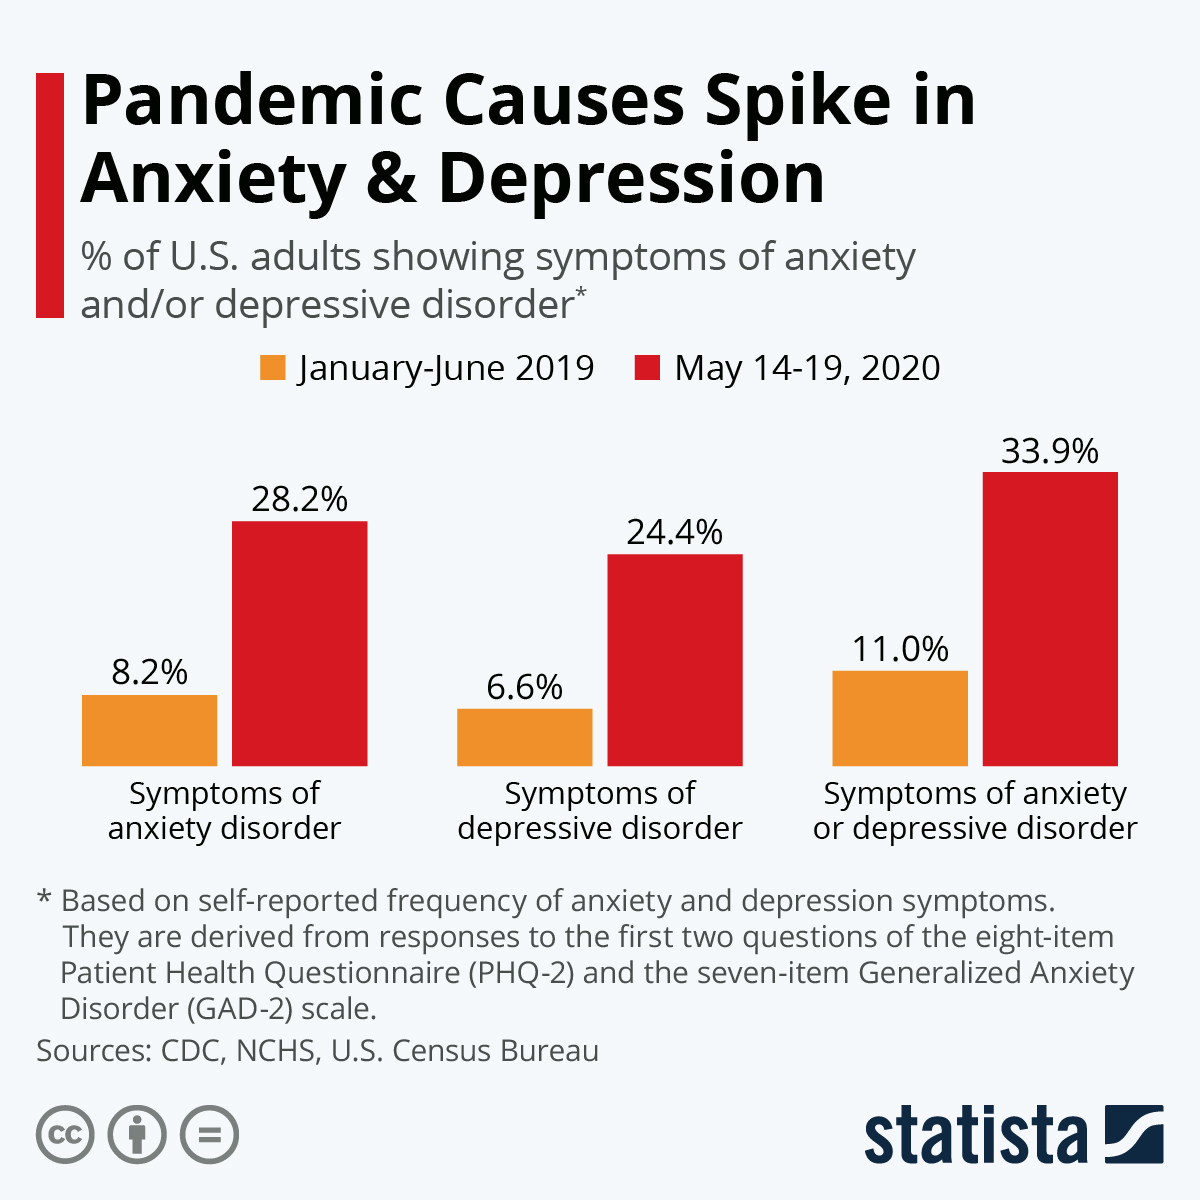 3. DEPRESSION: Data compiled by the U.S. Census Bureau and the National Center for Health Statistics, showing that one third of U.S. adults have symptoms of depression or anxiety, a sharp increase over the results of a comparable survey conducted in the first half of 2019.